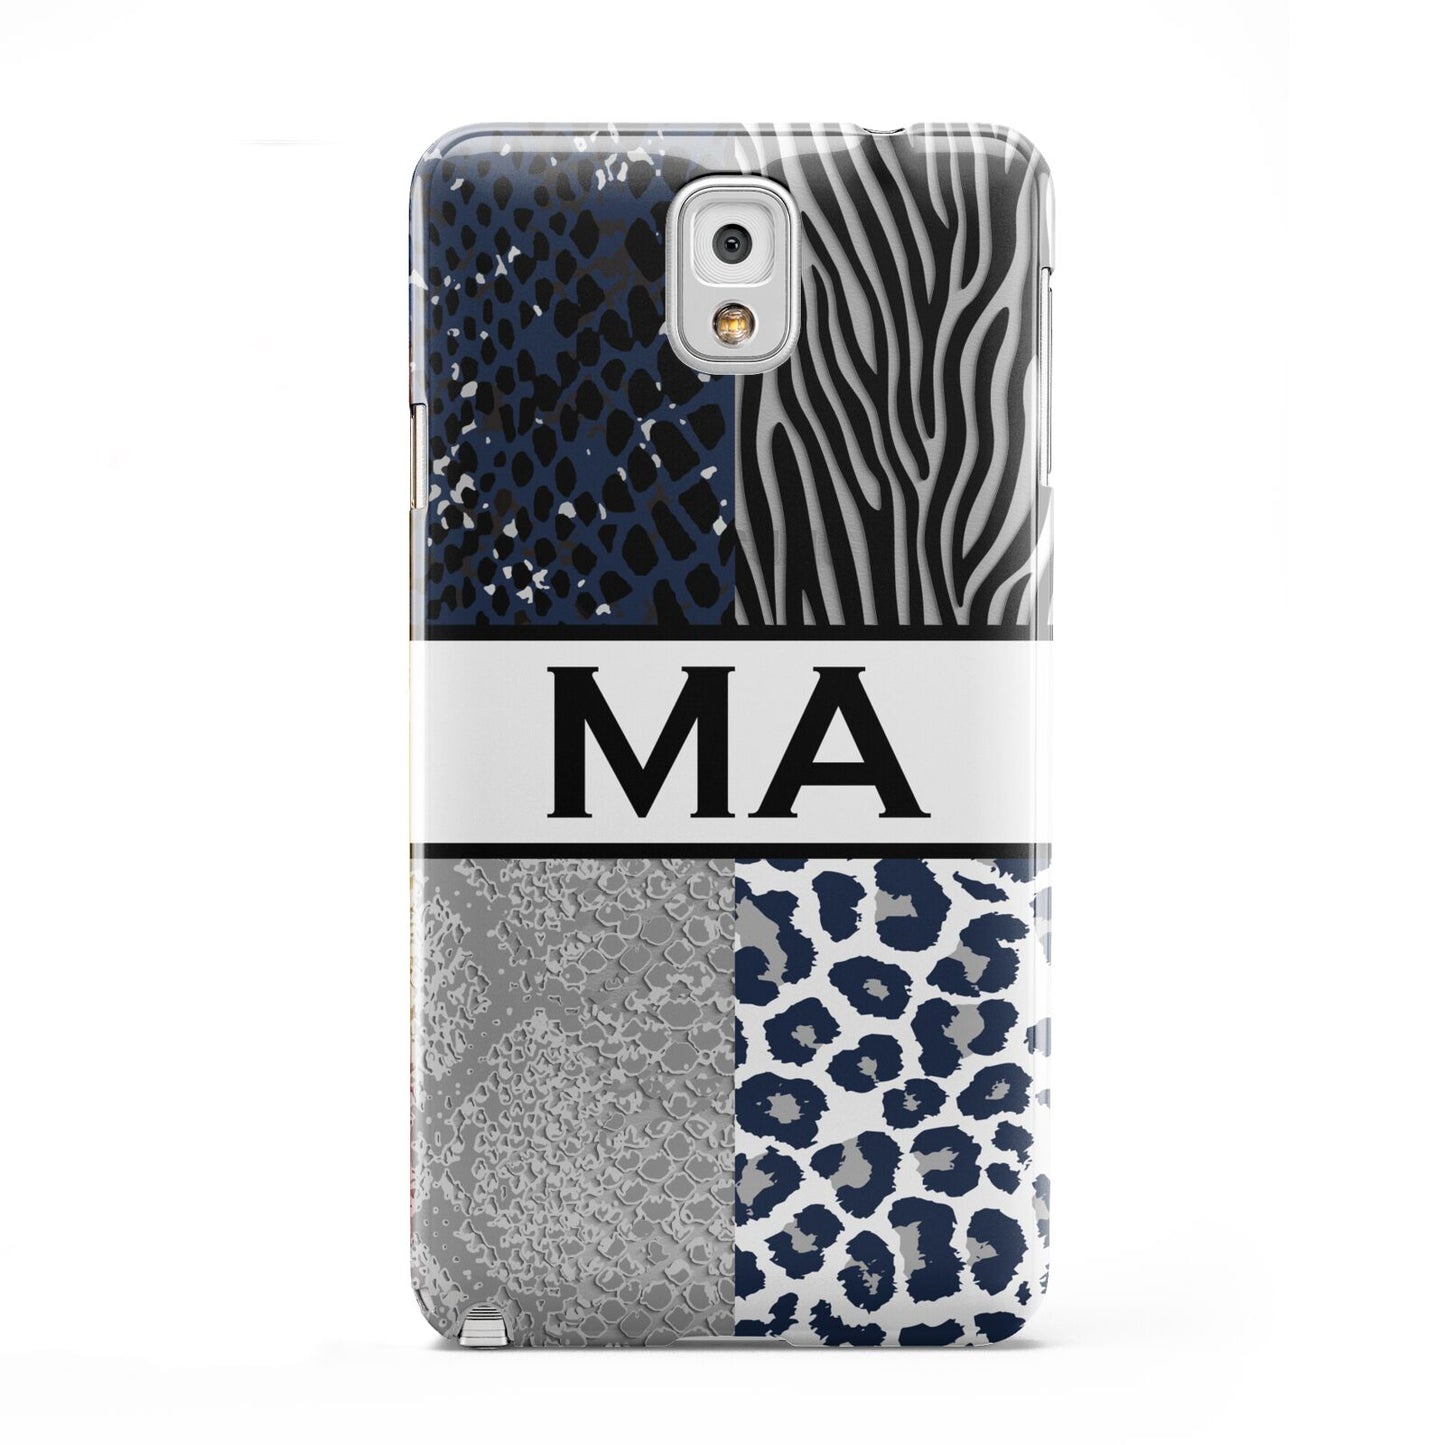 Personalised Animal Print Samsung Galaxy Note 3 Case